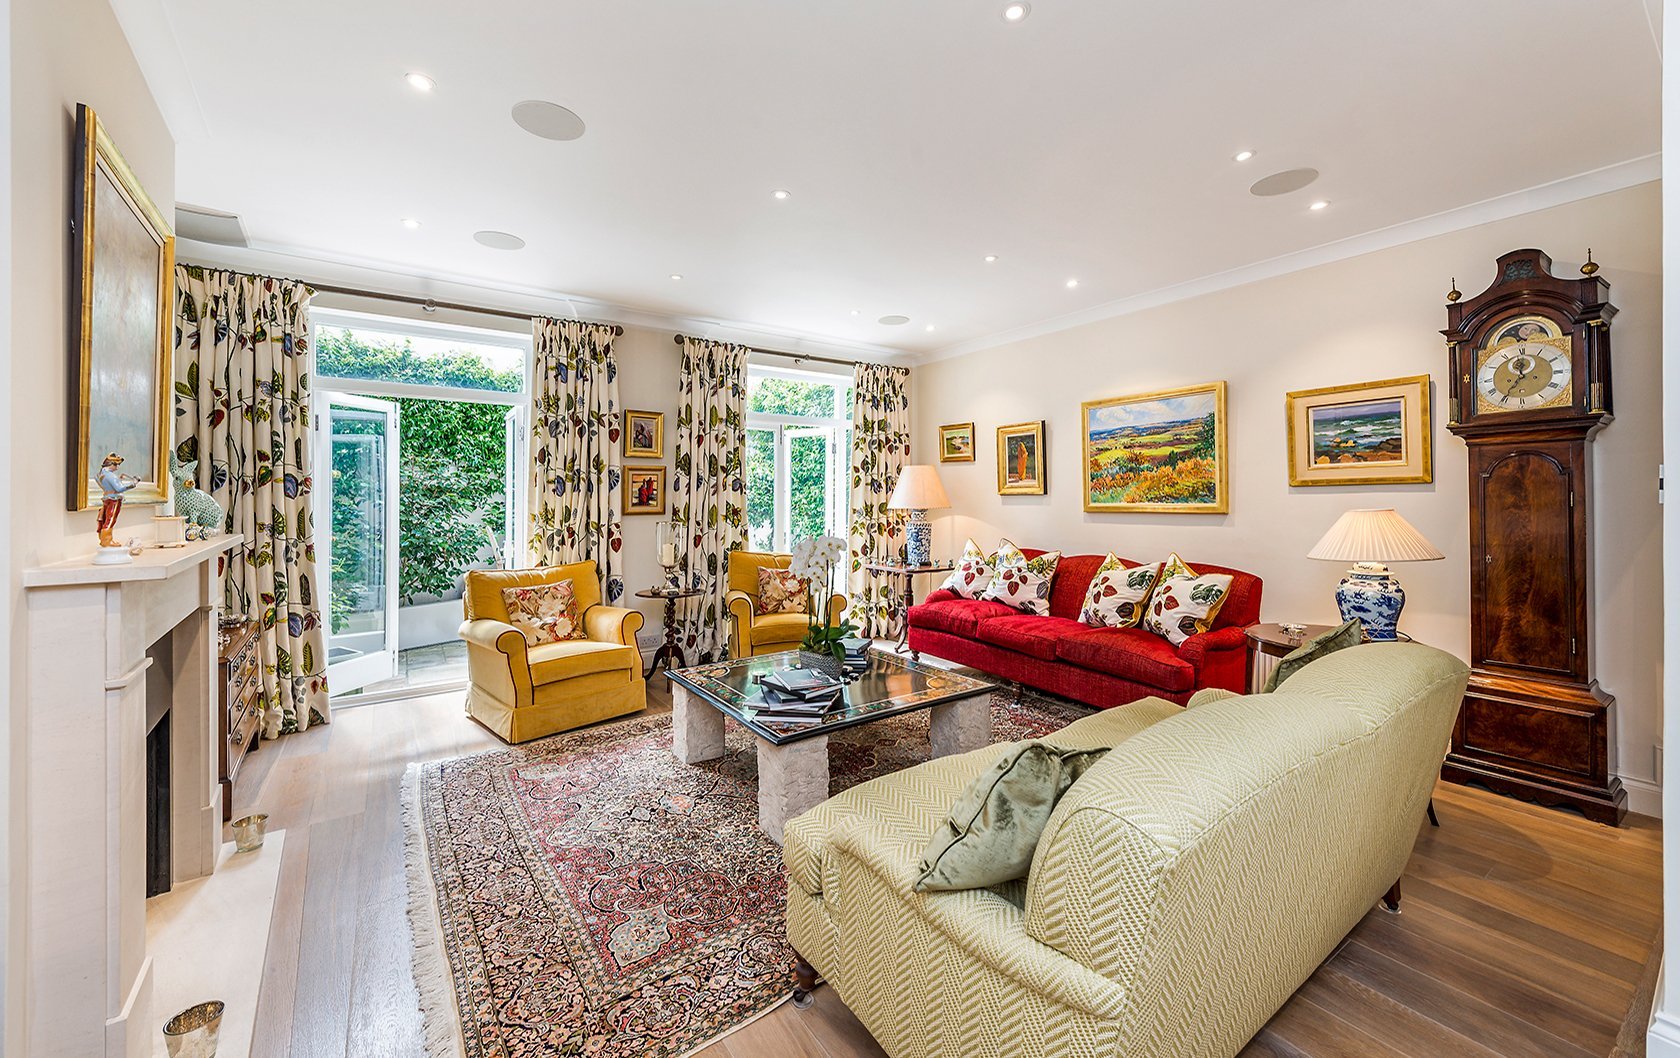 Property Of The Month: A Fabulous Mews House in South Kensington